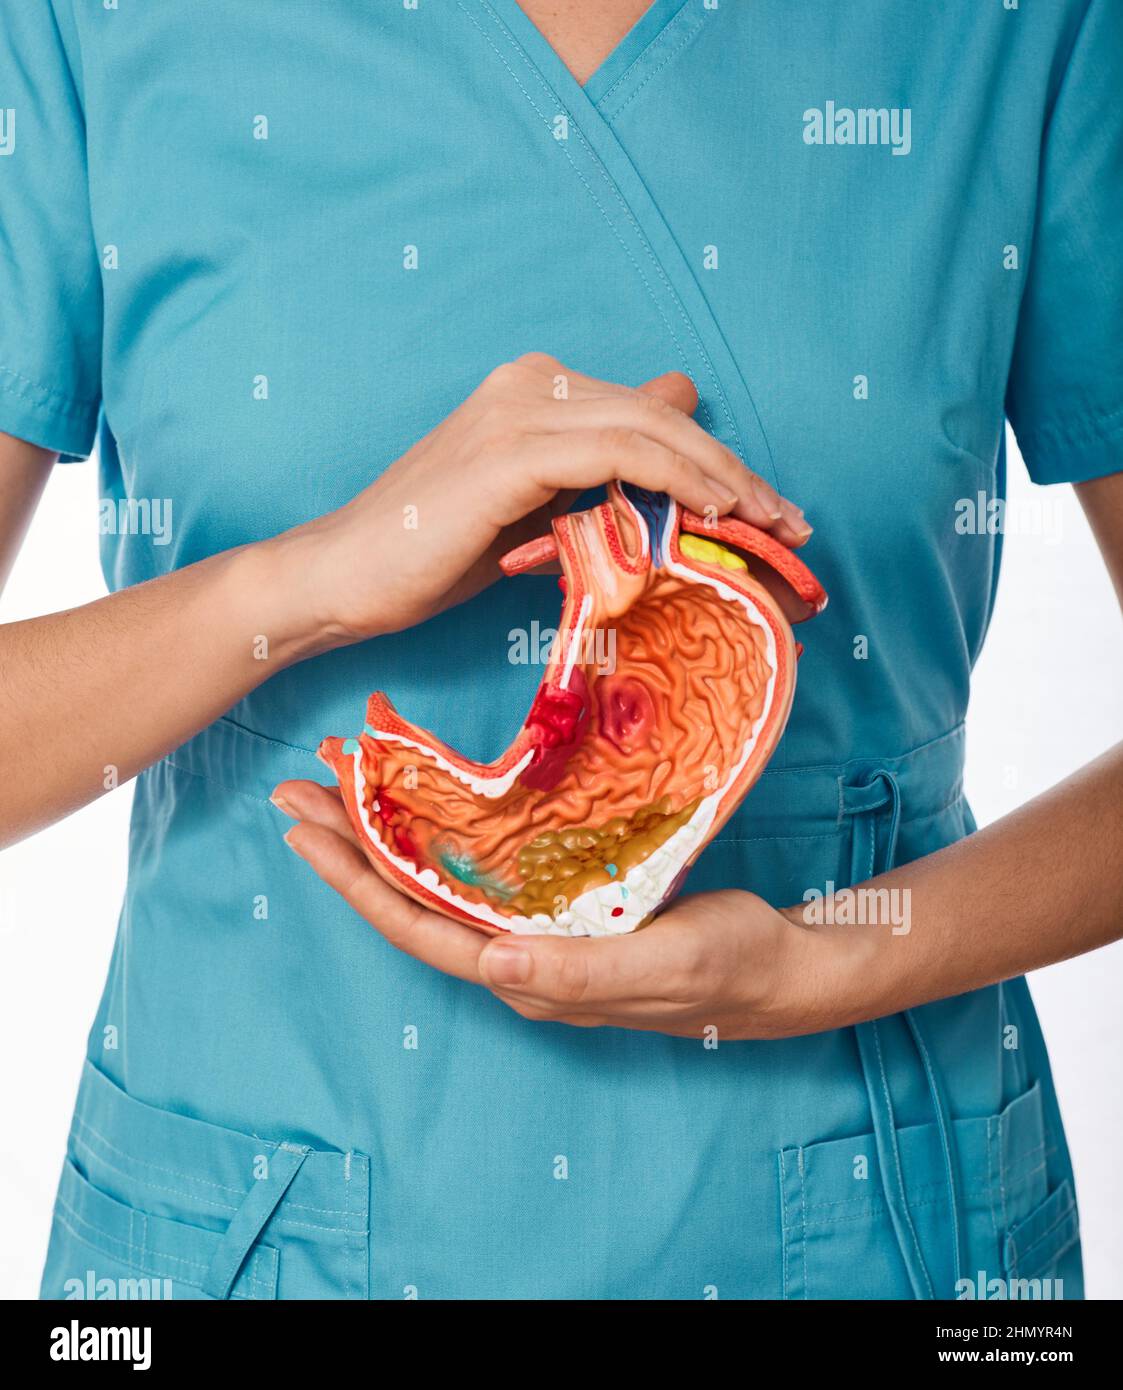 Diagnosis and treatment of stomach disease. doctor holding anatomical model of stomach with pathologies. Stomach health concept Stock Photo